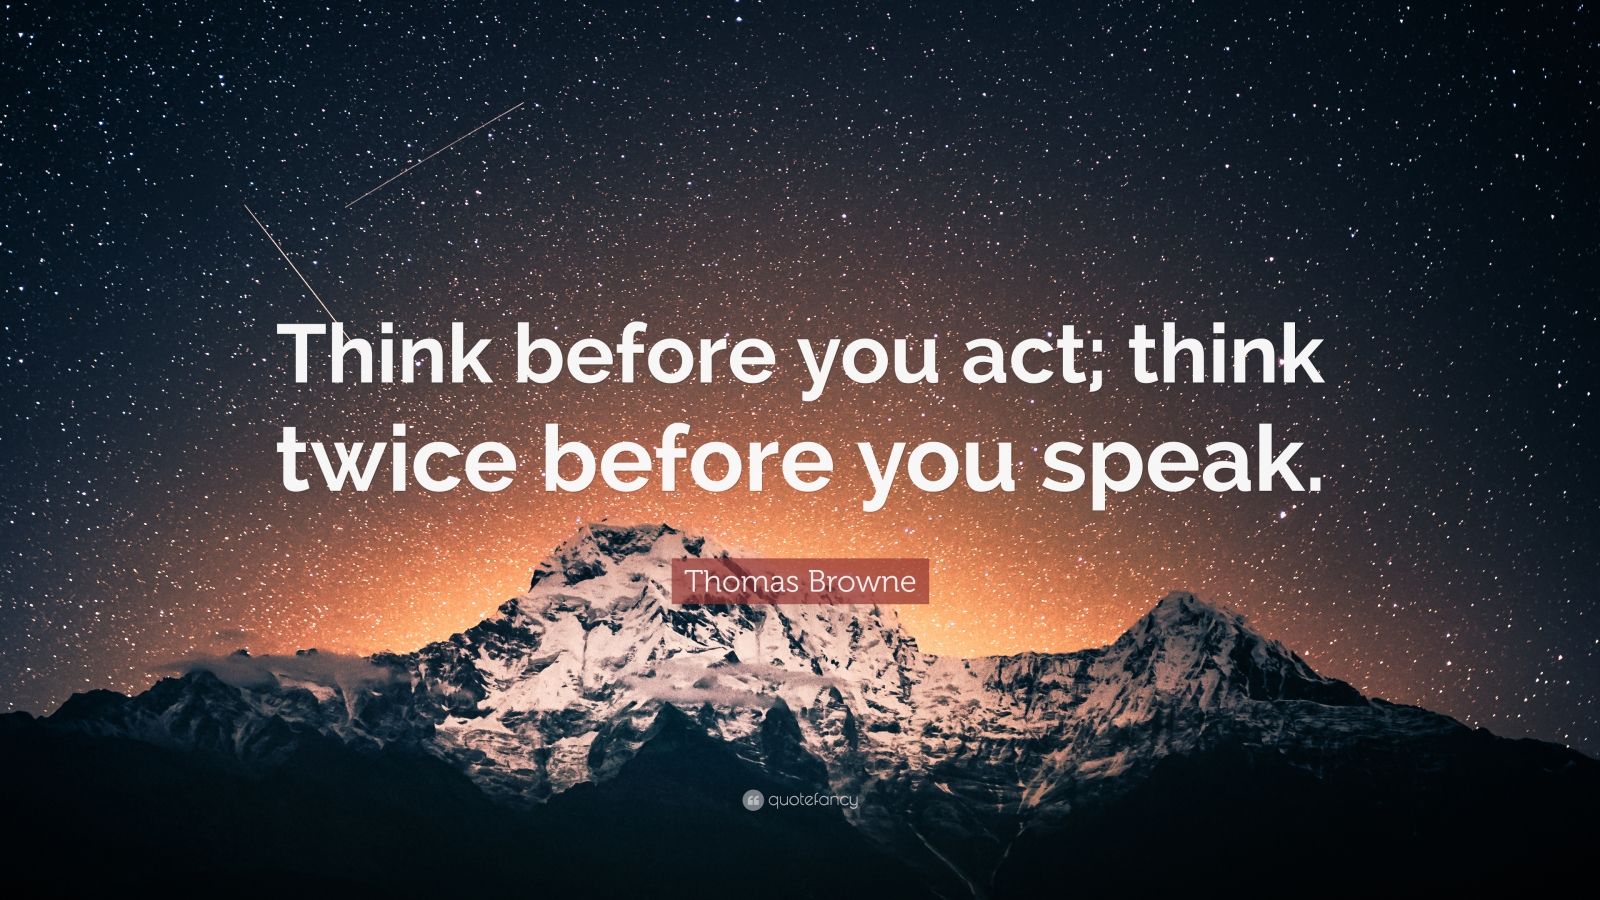 Thomas Browne Quote: "Think before you act; think twice before you speak." (9 wallpapers ...